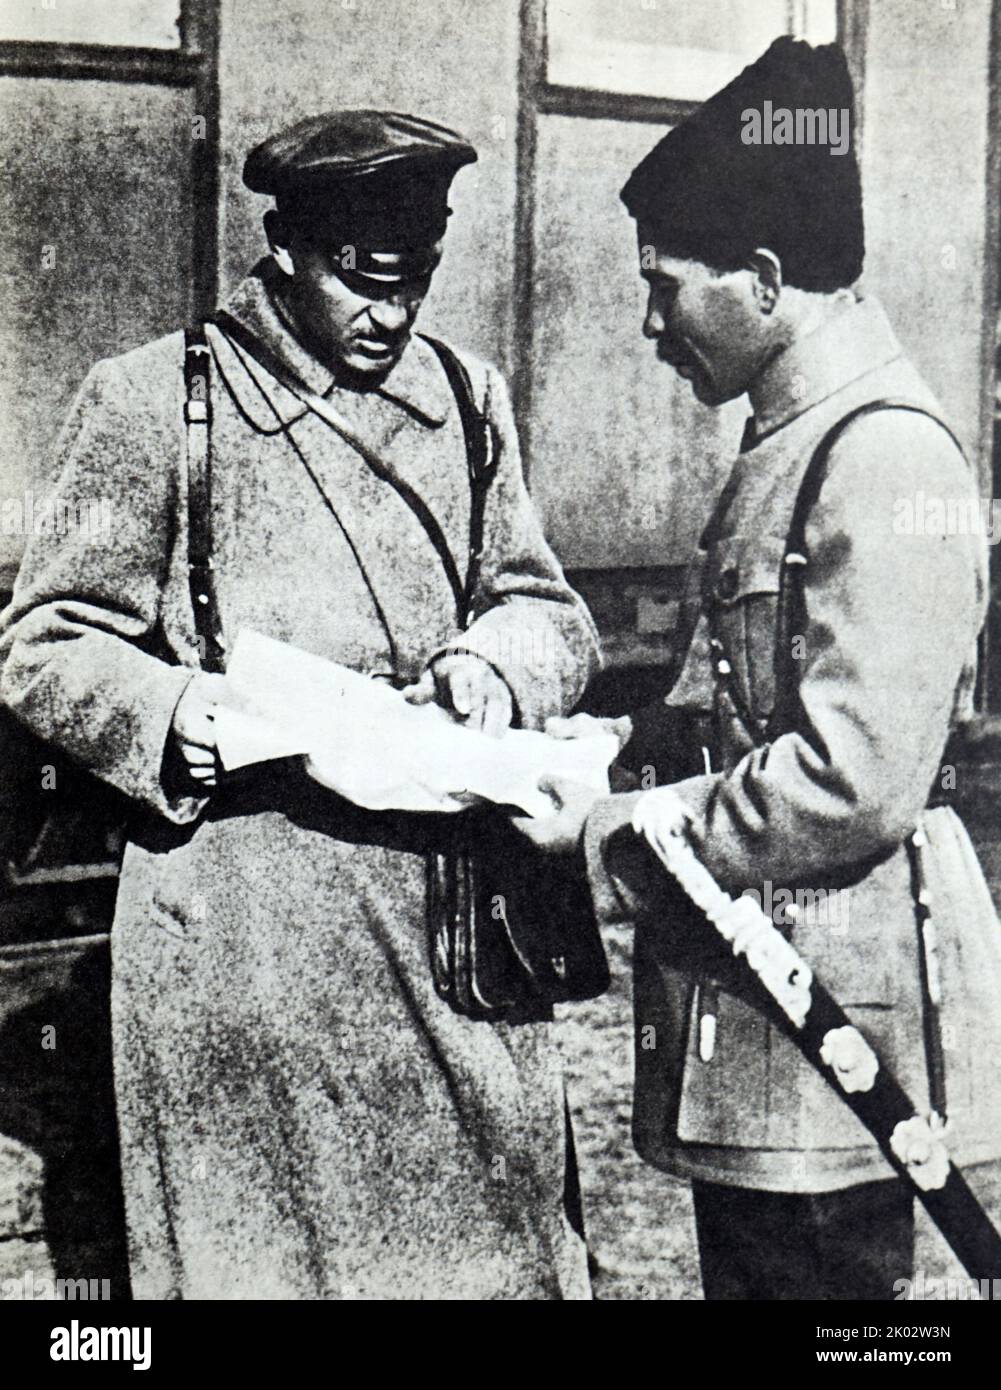 The chiefs of the 22nd and 25th divisions S. P. Zakharov and V. I. Chapaev on the Eastern Front. 1919 year. Photo by P. Ermolov. Stock Photo